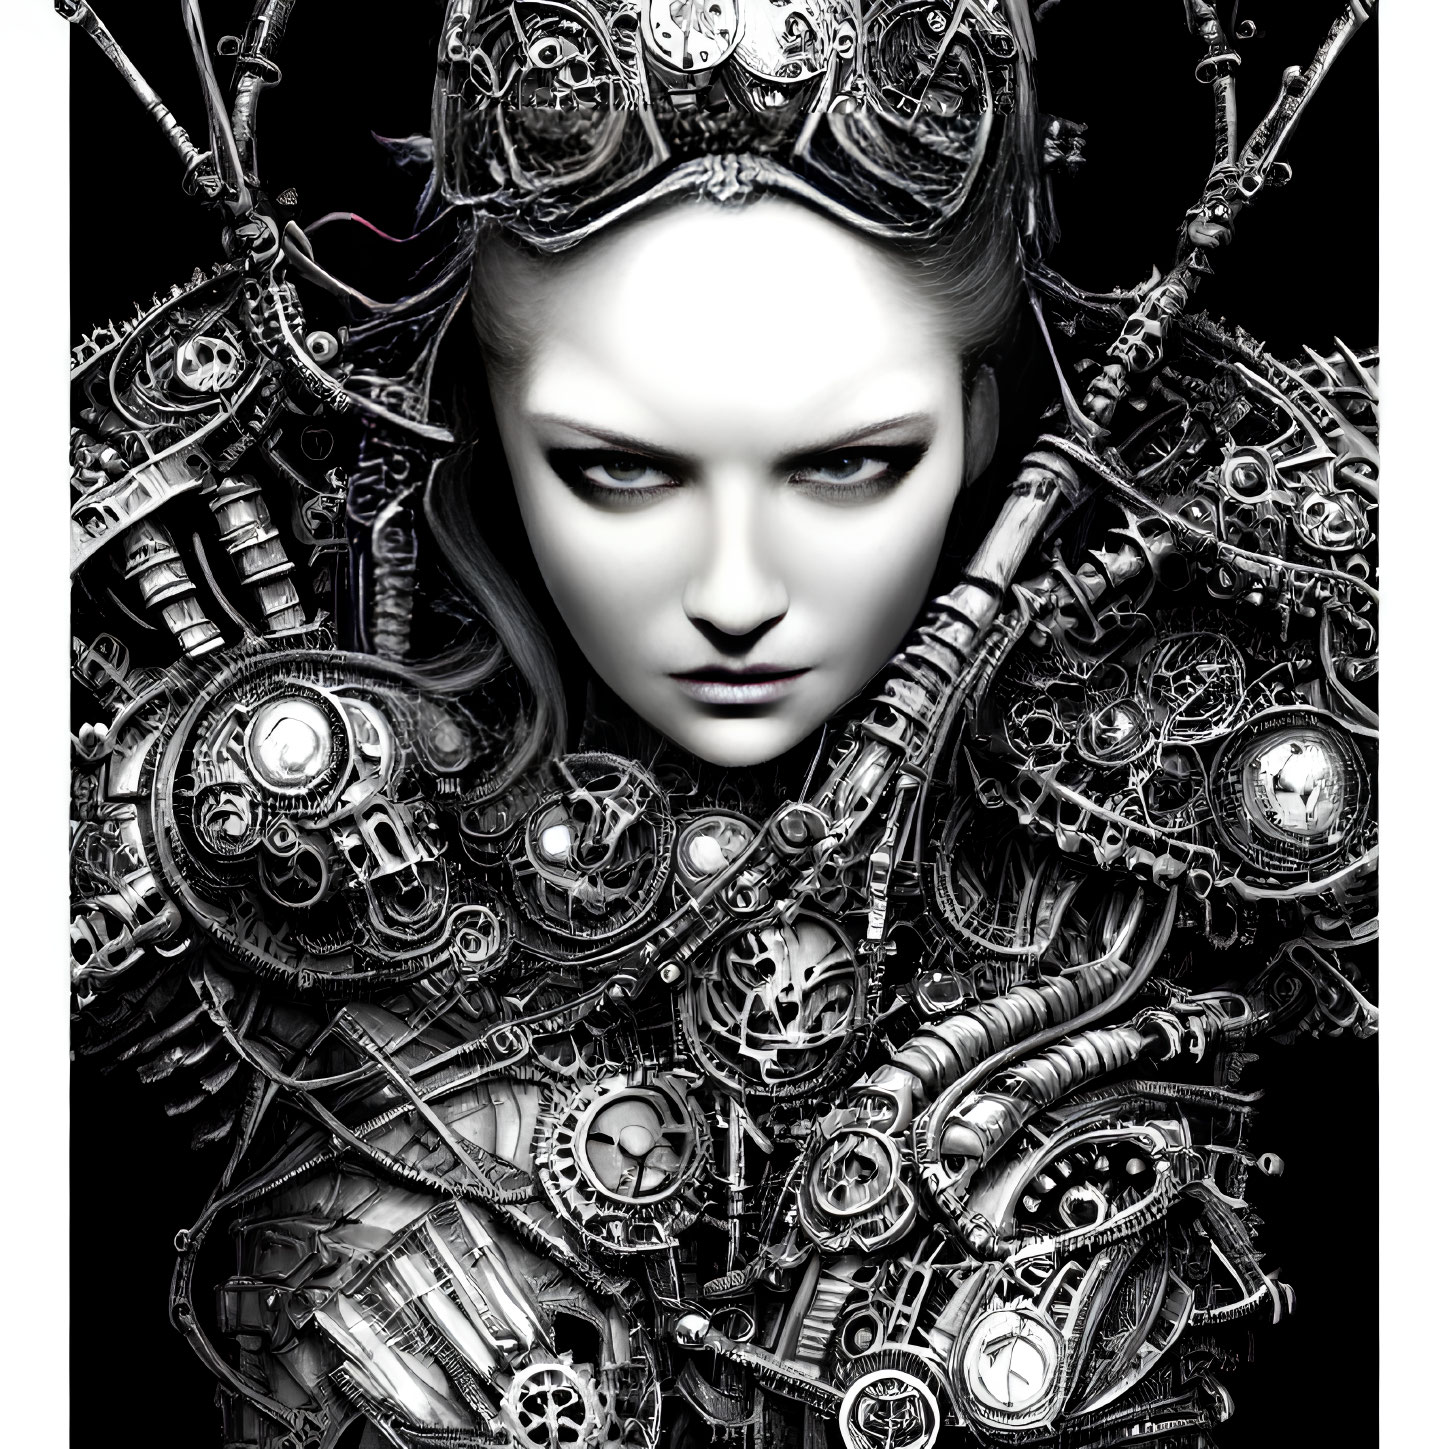 Futuristic humanoid figure with mechanical headdress and armor on black background